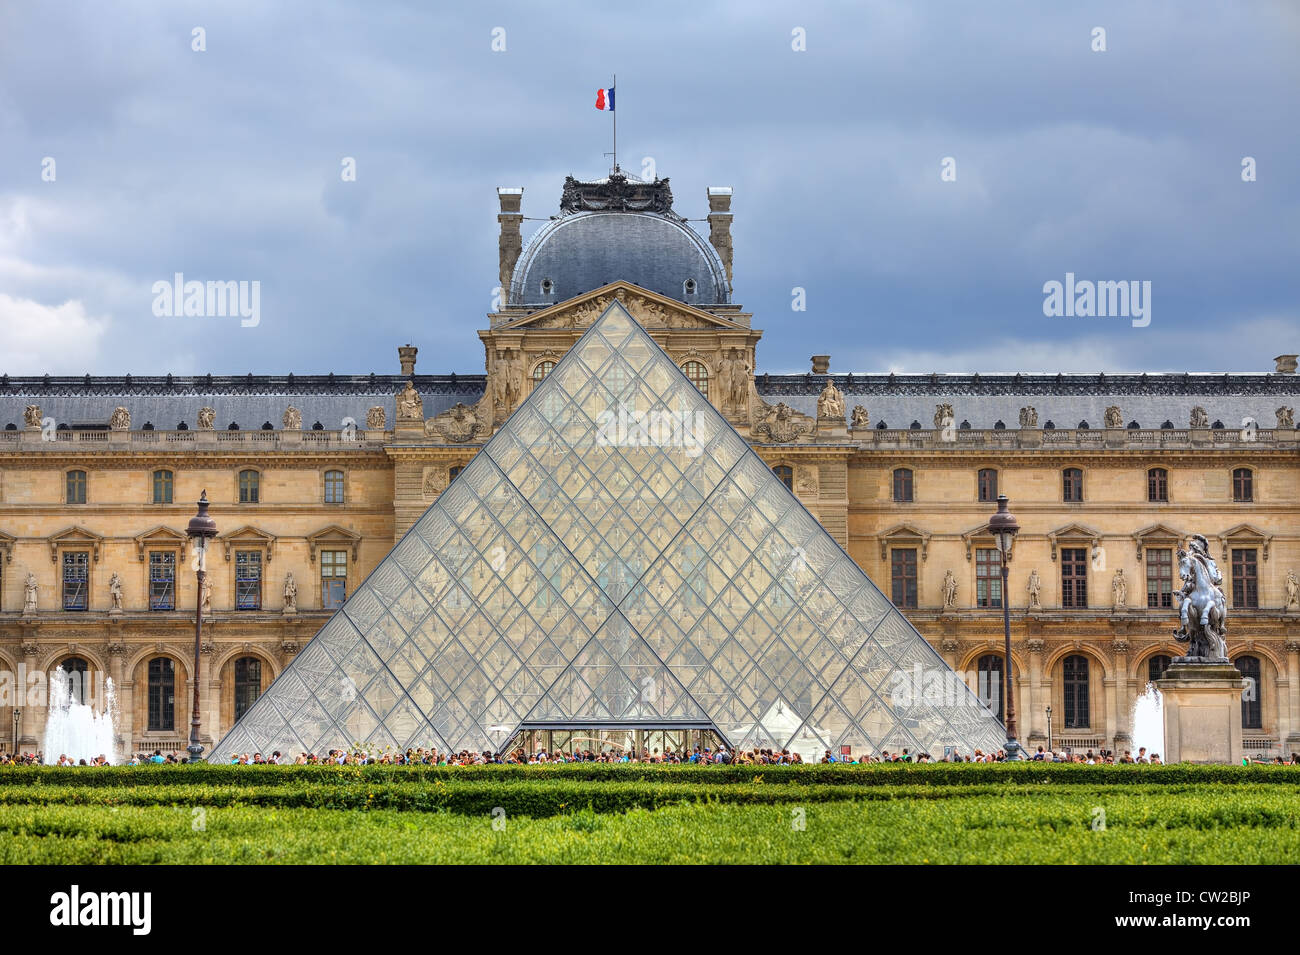 Facade of Pyramid and Louvre Museum (former Royal Palace) on background in Paris, France. Stock Photo